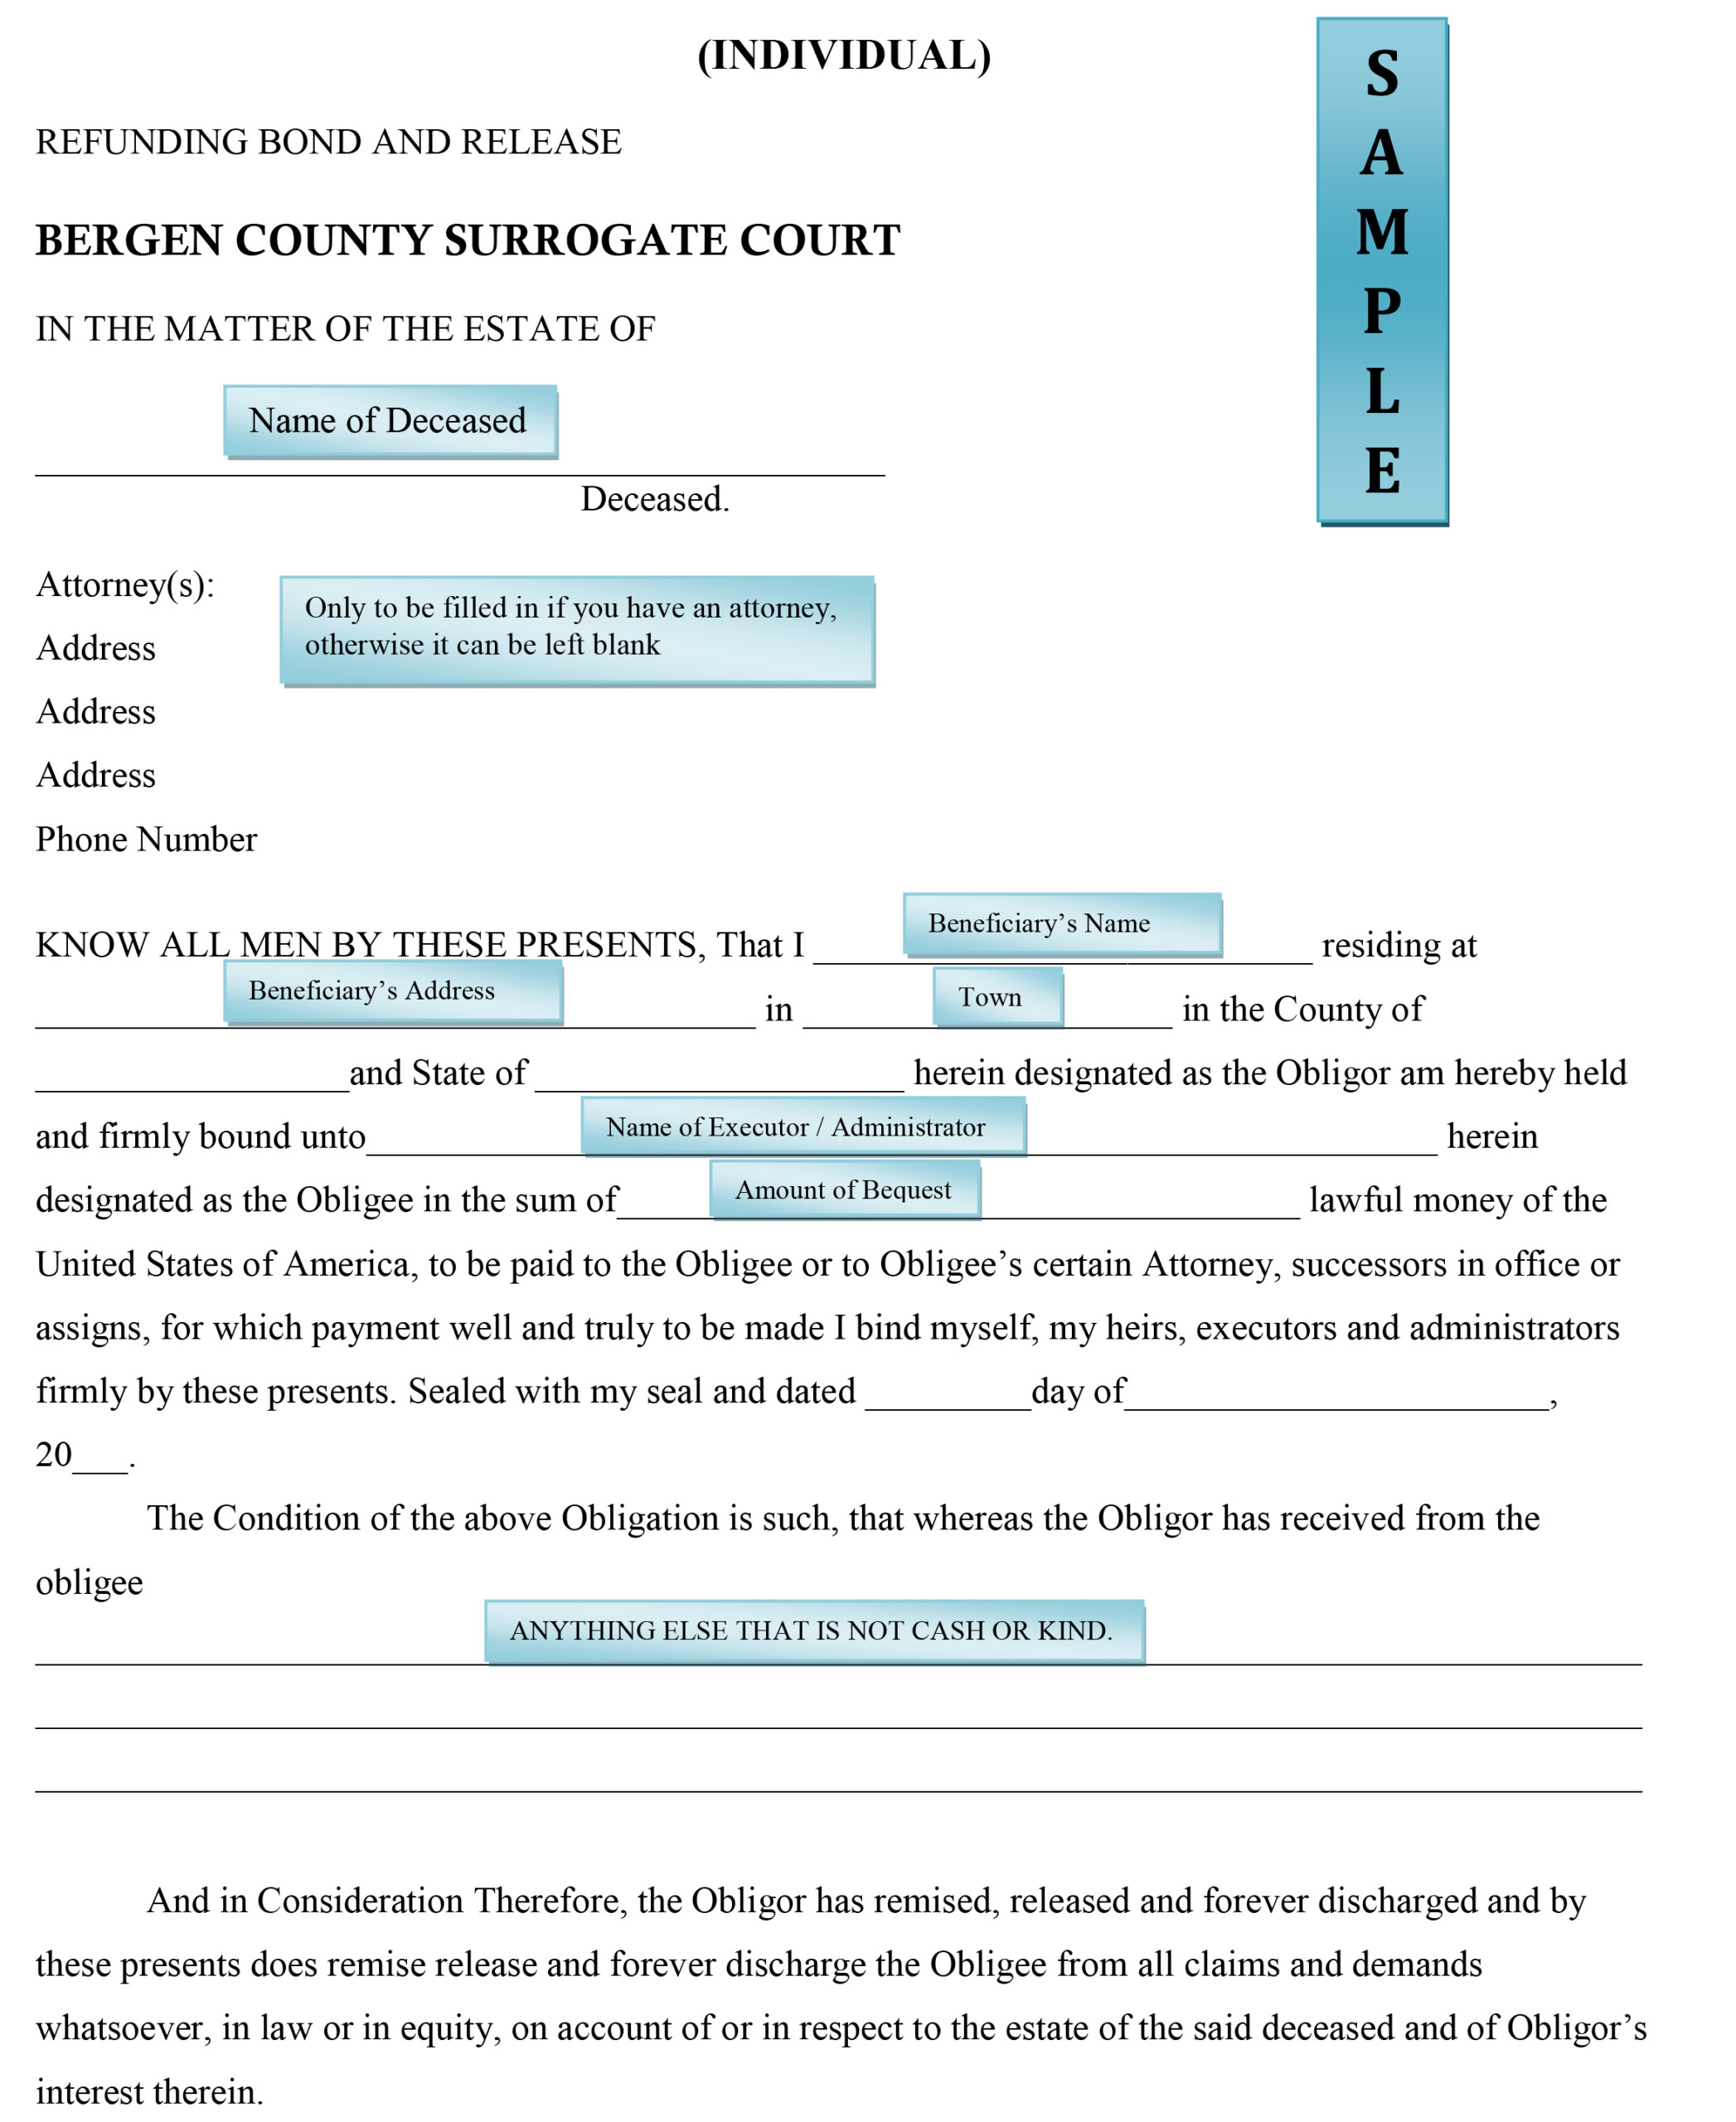 Bergen County Surrogate Court Refunding Bond And Release 2020 2021